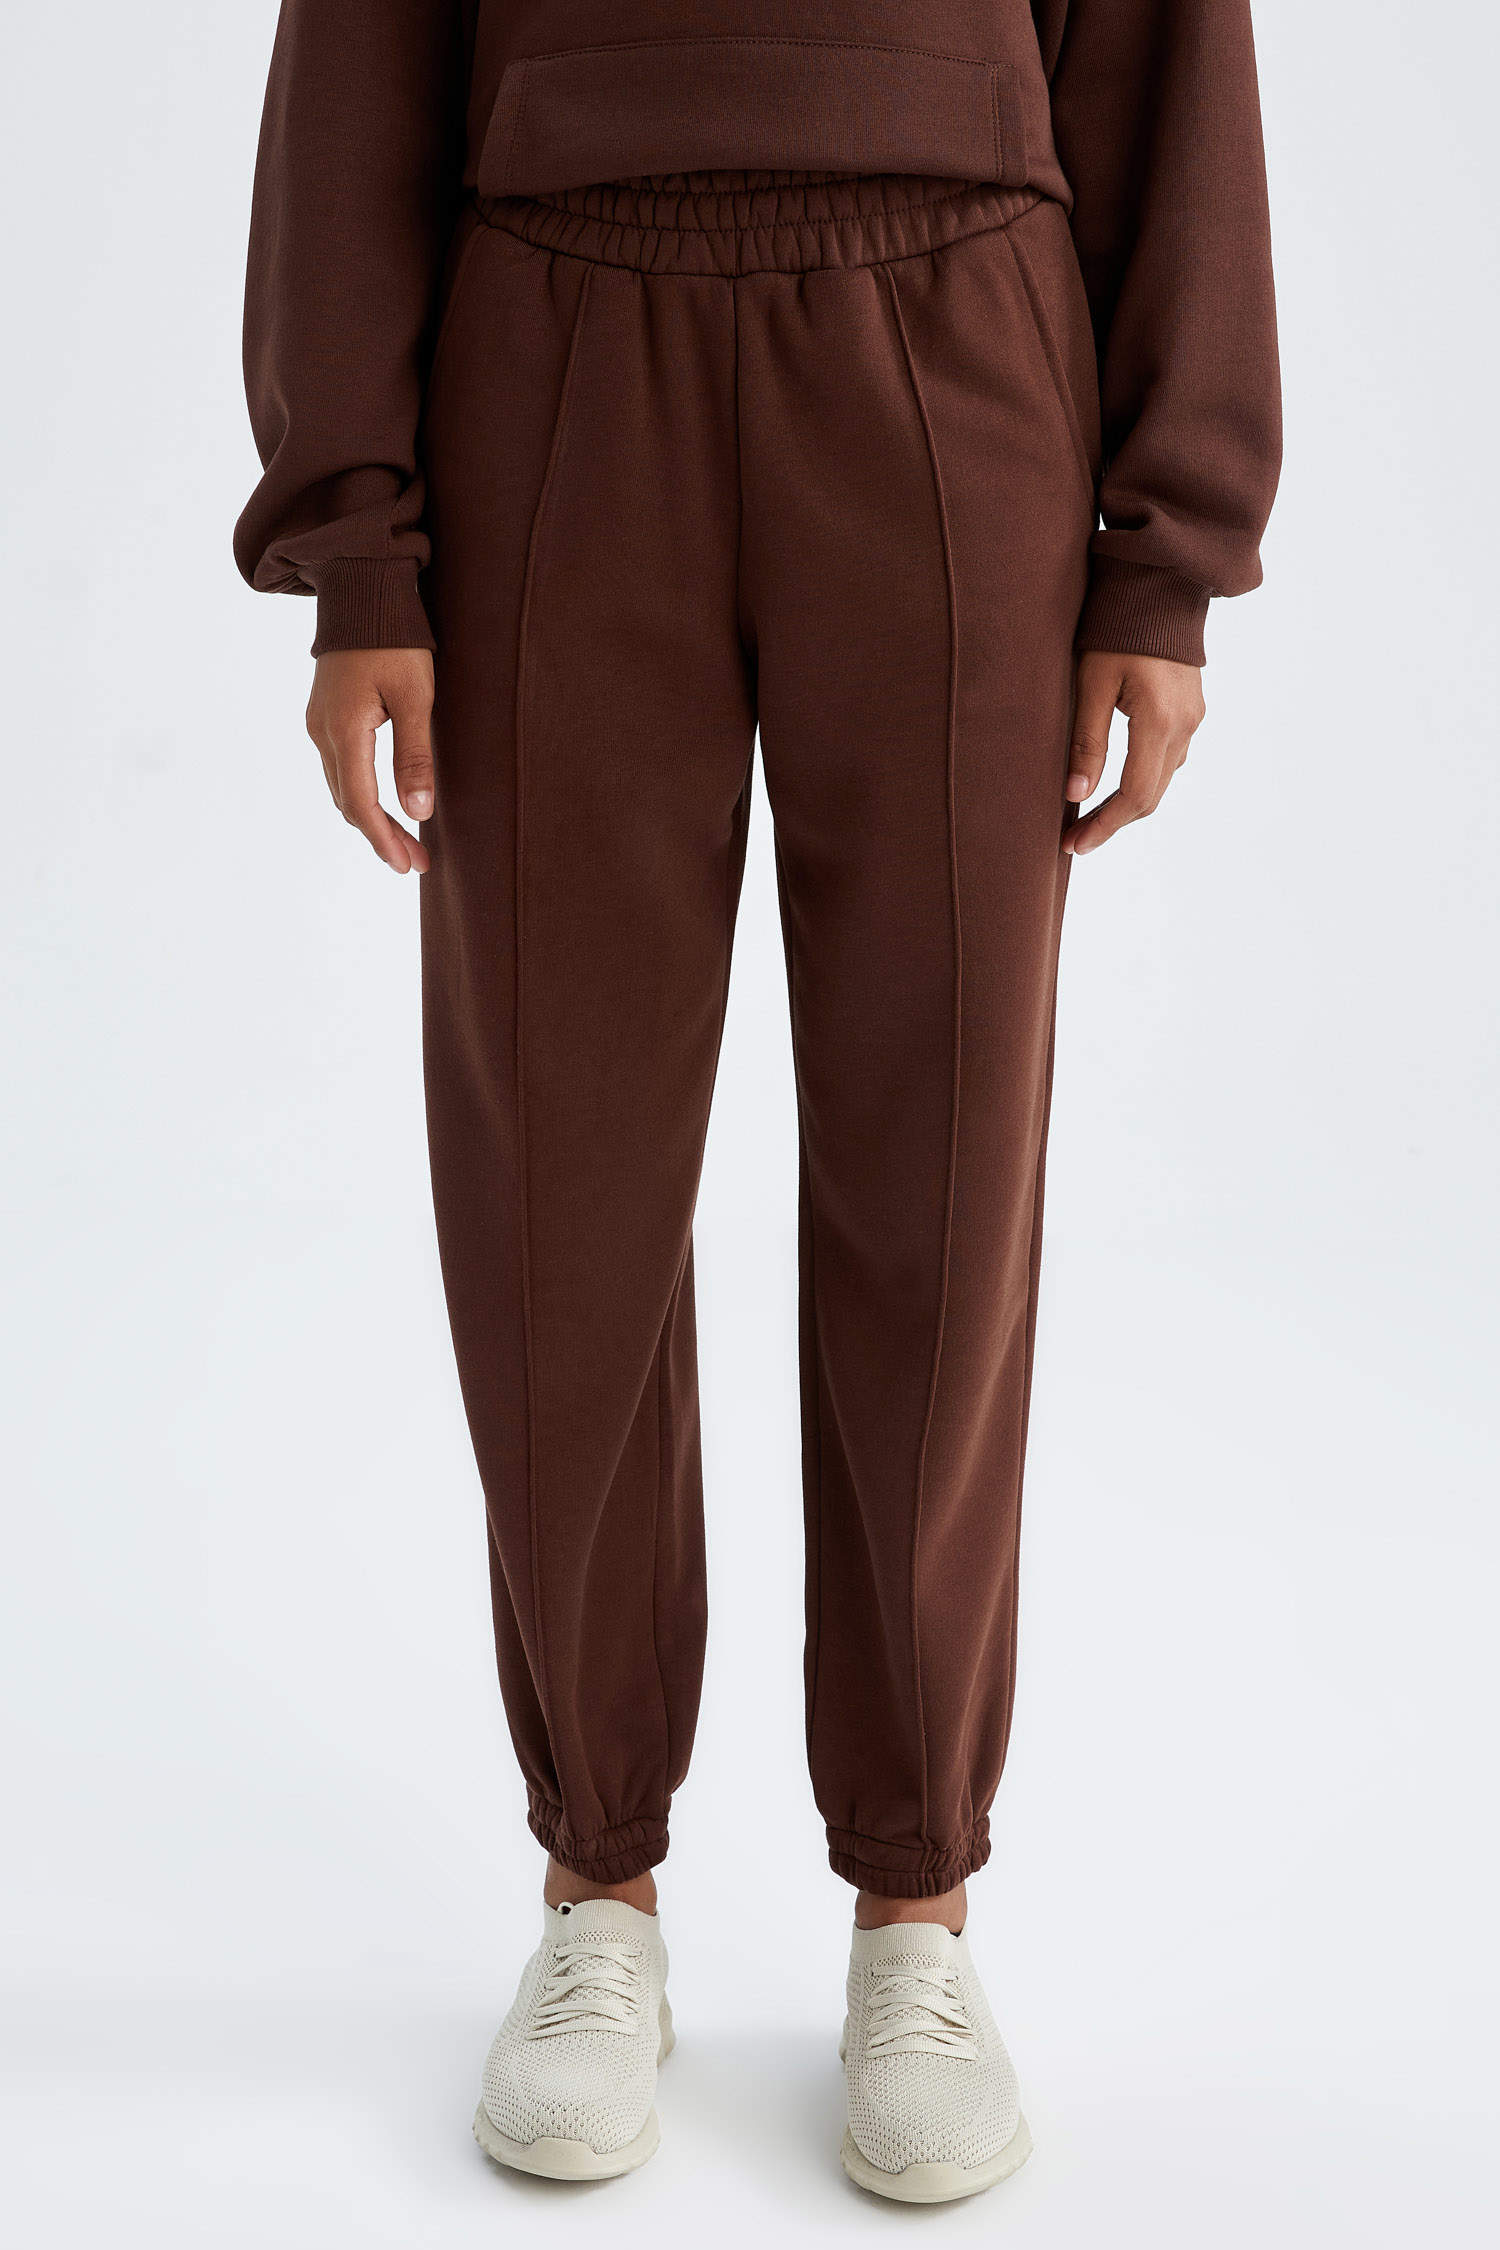 Brown WOMAN Oversize Fit Thick Sweatshirt Fabric Trousers 2630925 | DeFacto